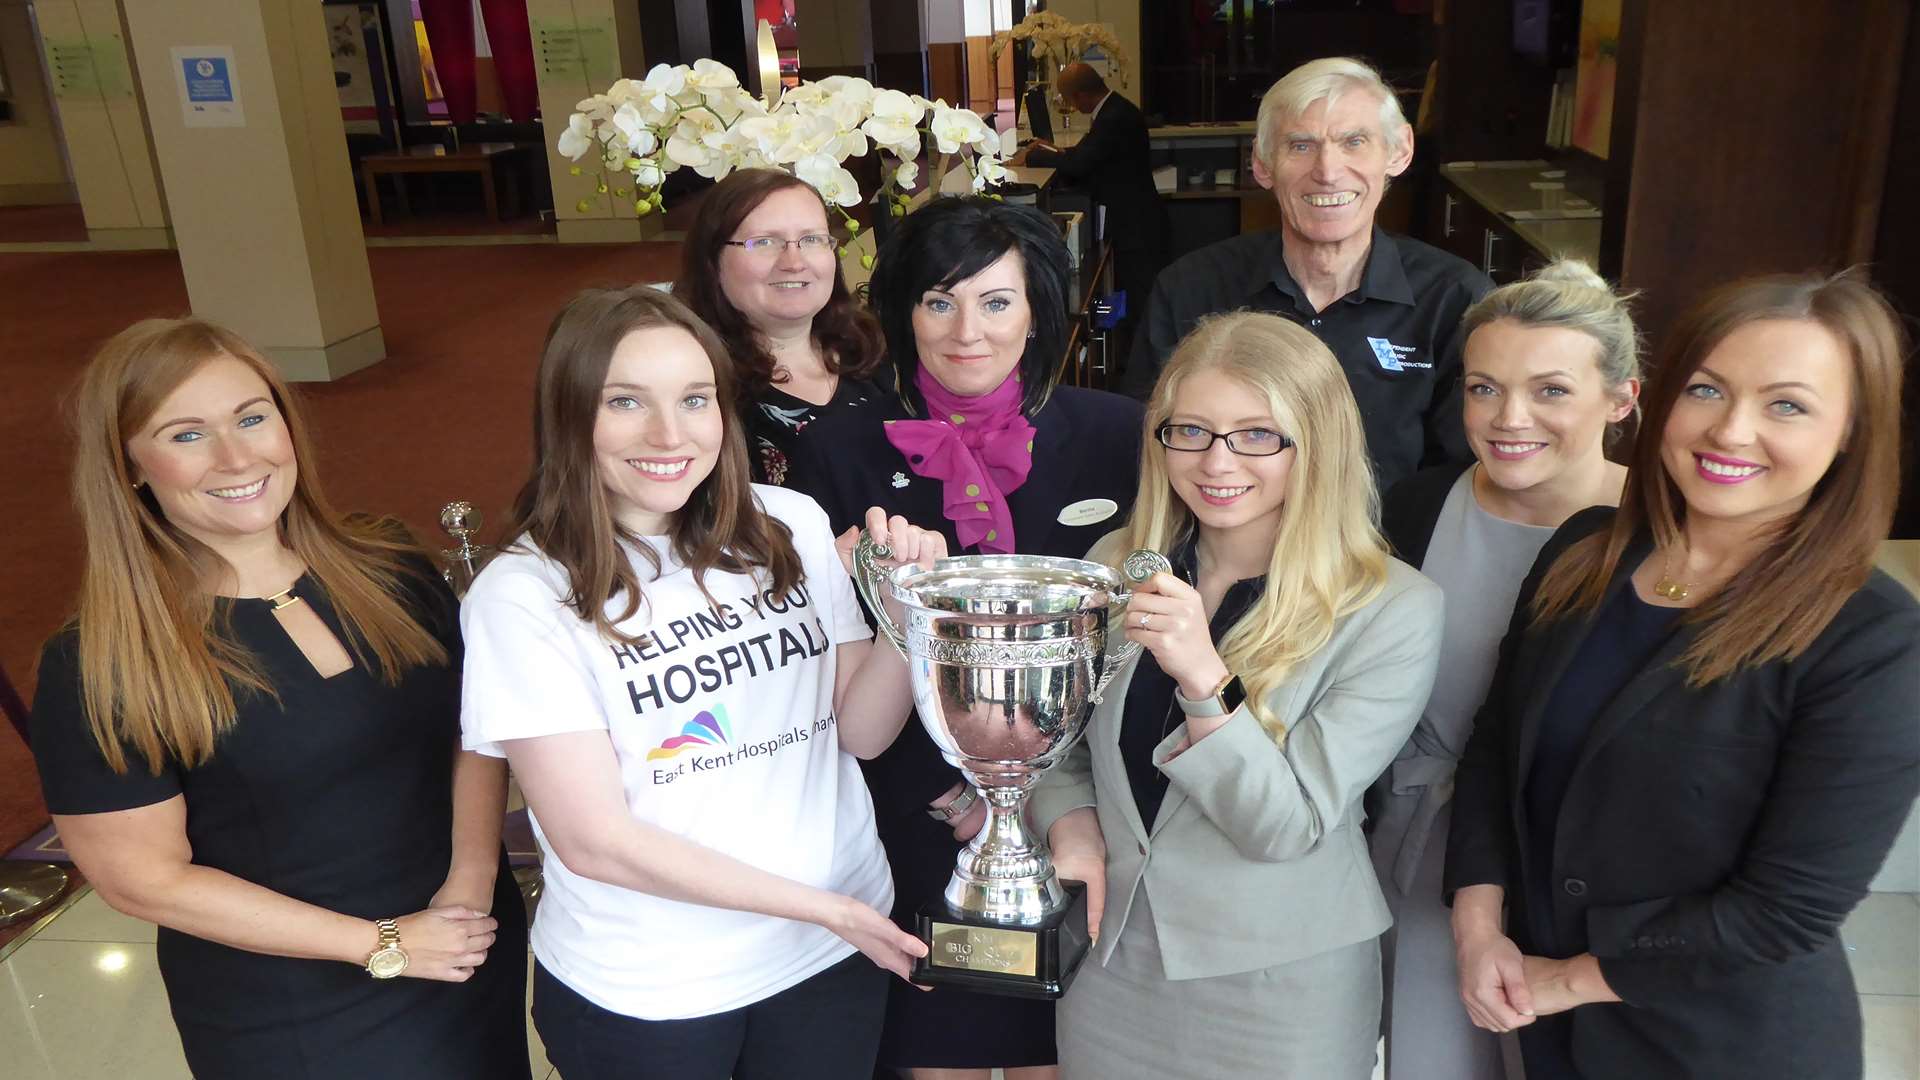 Victoria Adley of East Kent Hospitals Charity Dementia Appeal and Sophie Richardson of Hallett & Co join event partners to unveil the giant trophy teams will be competing for at the KM Big Charity Quiz.